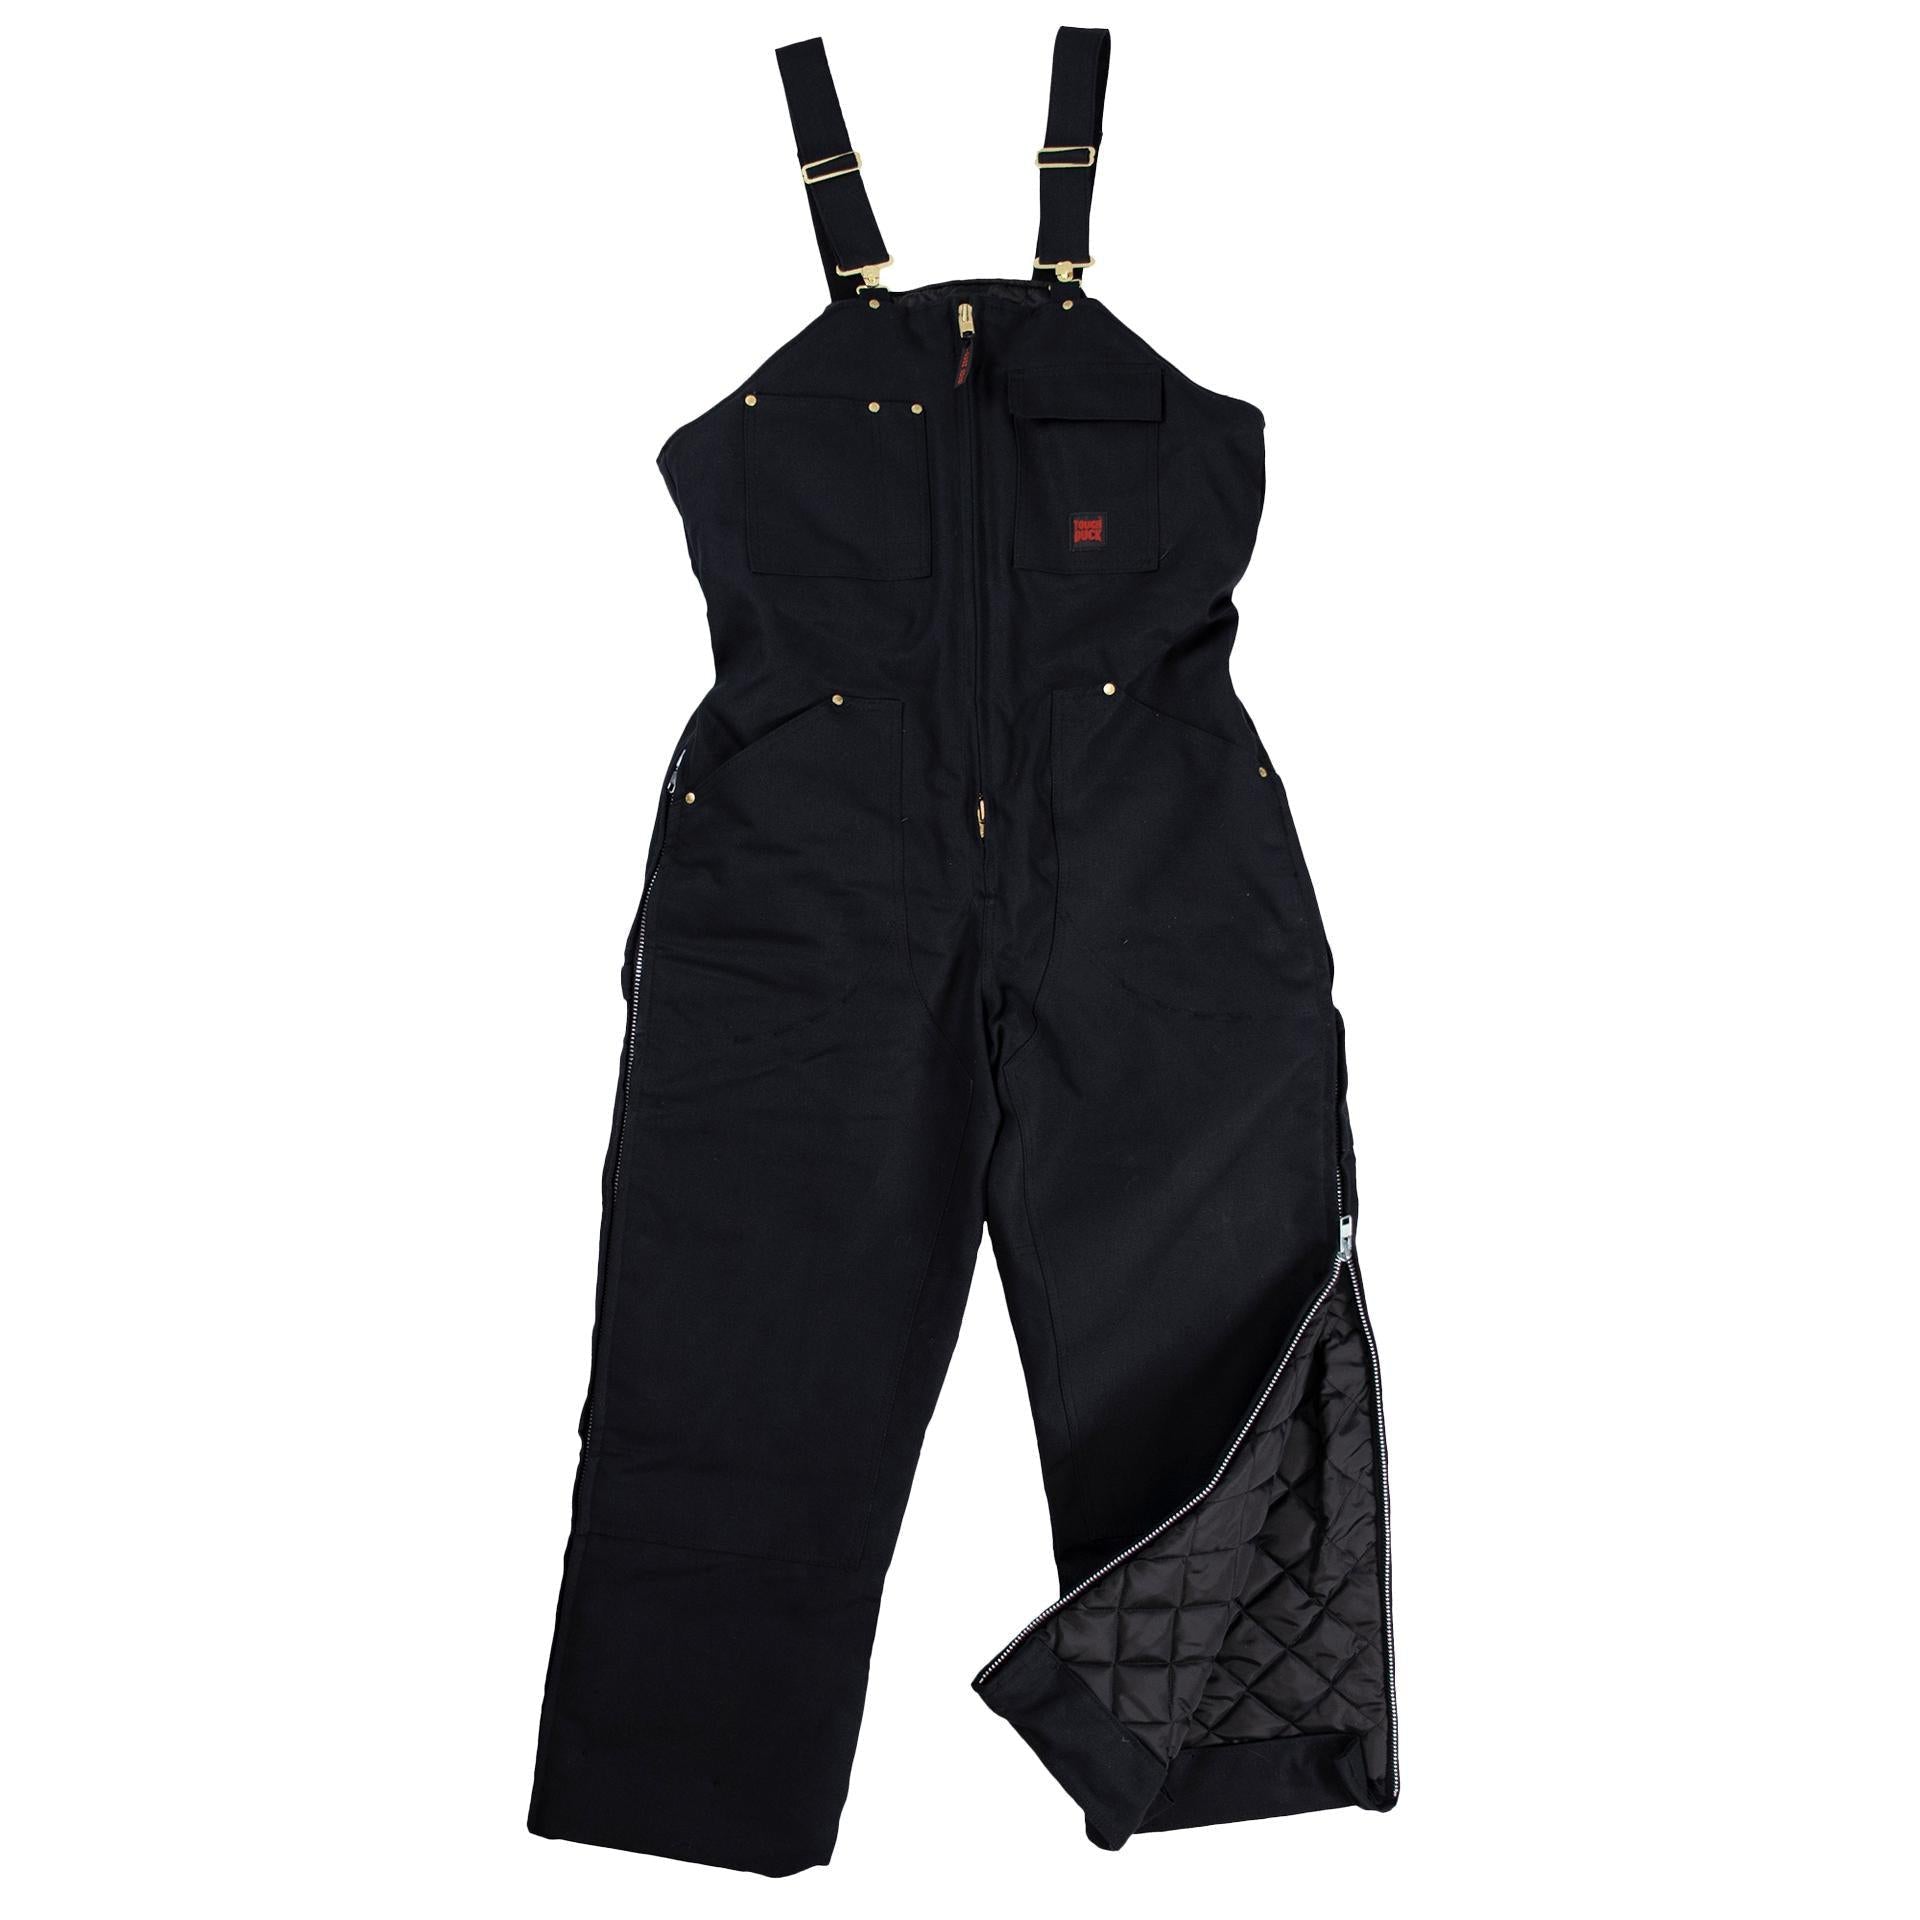 Deluxe Tough Duck lined overalls